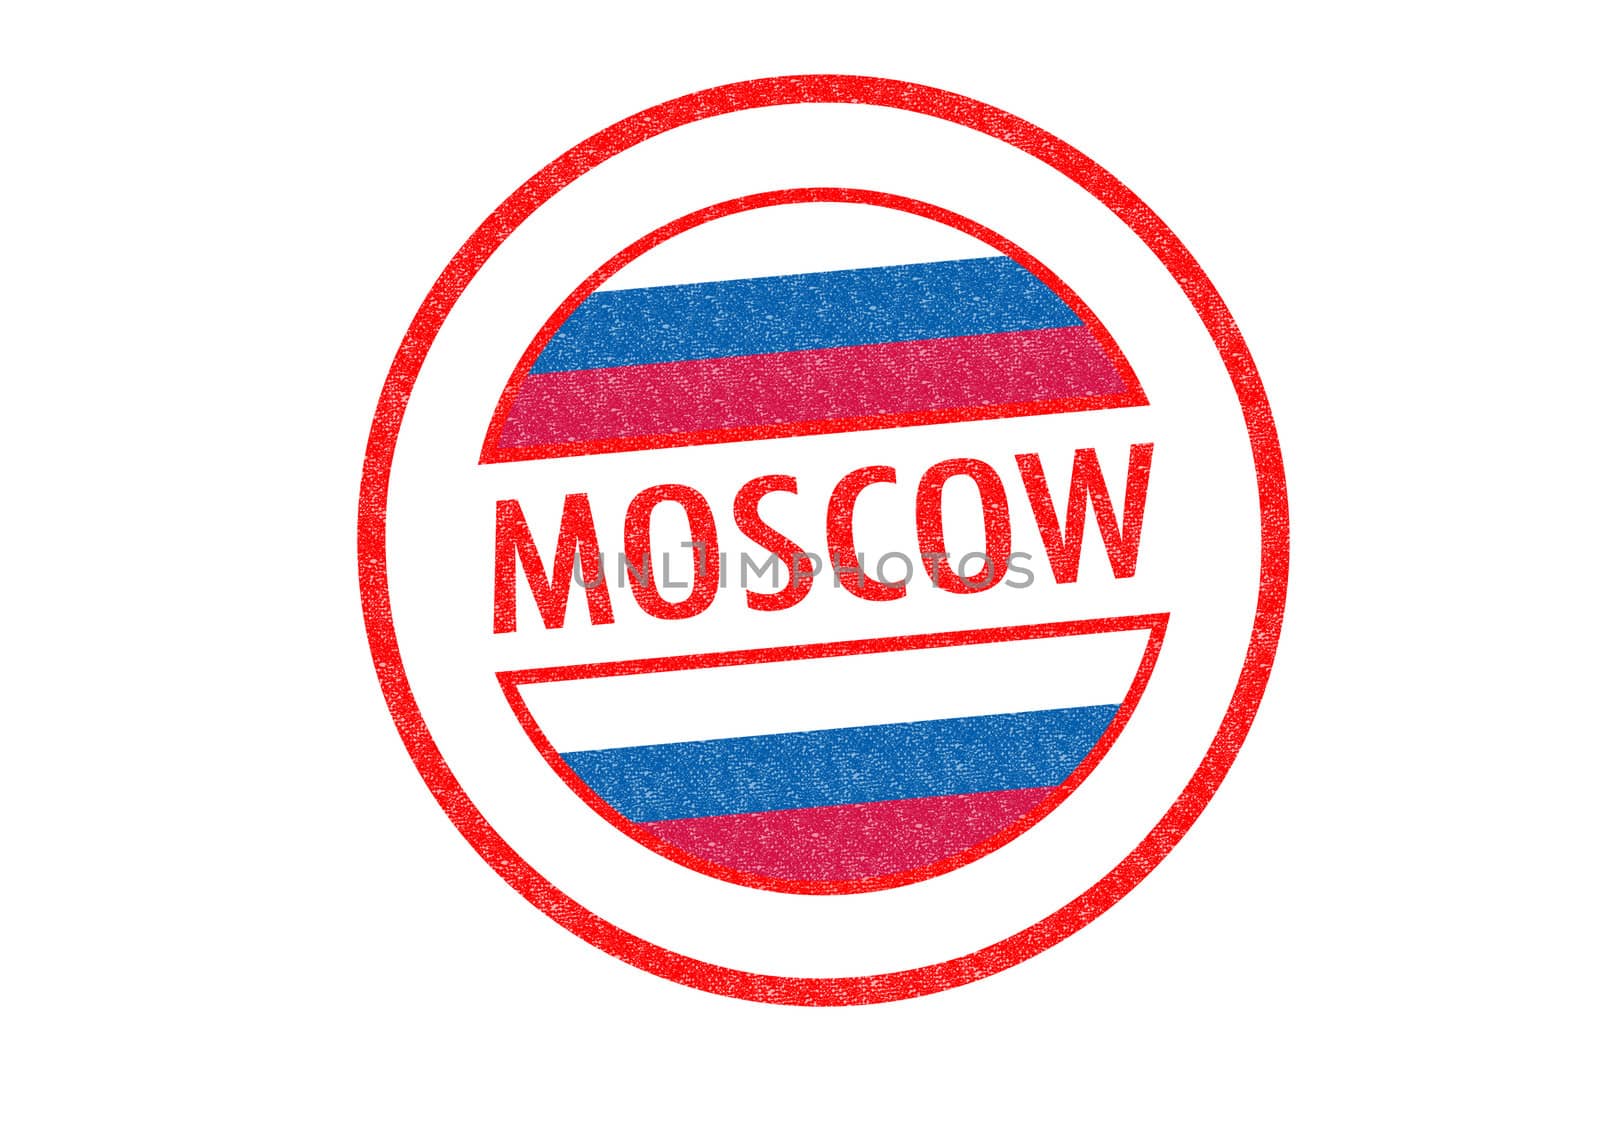 Passport-style MOSCOW rubber stamp over a white background.